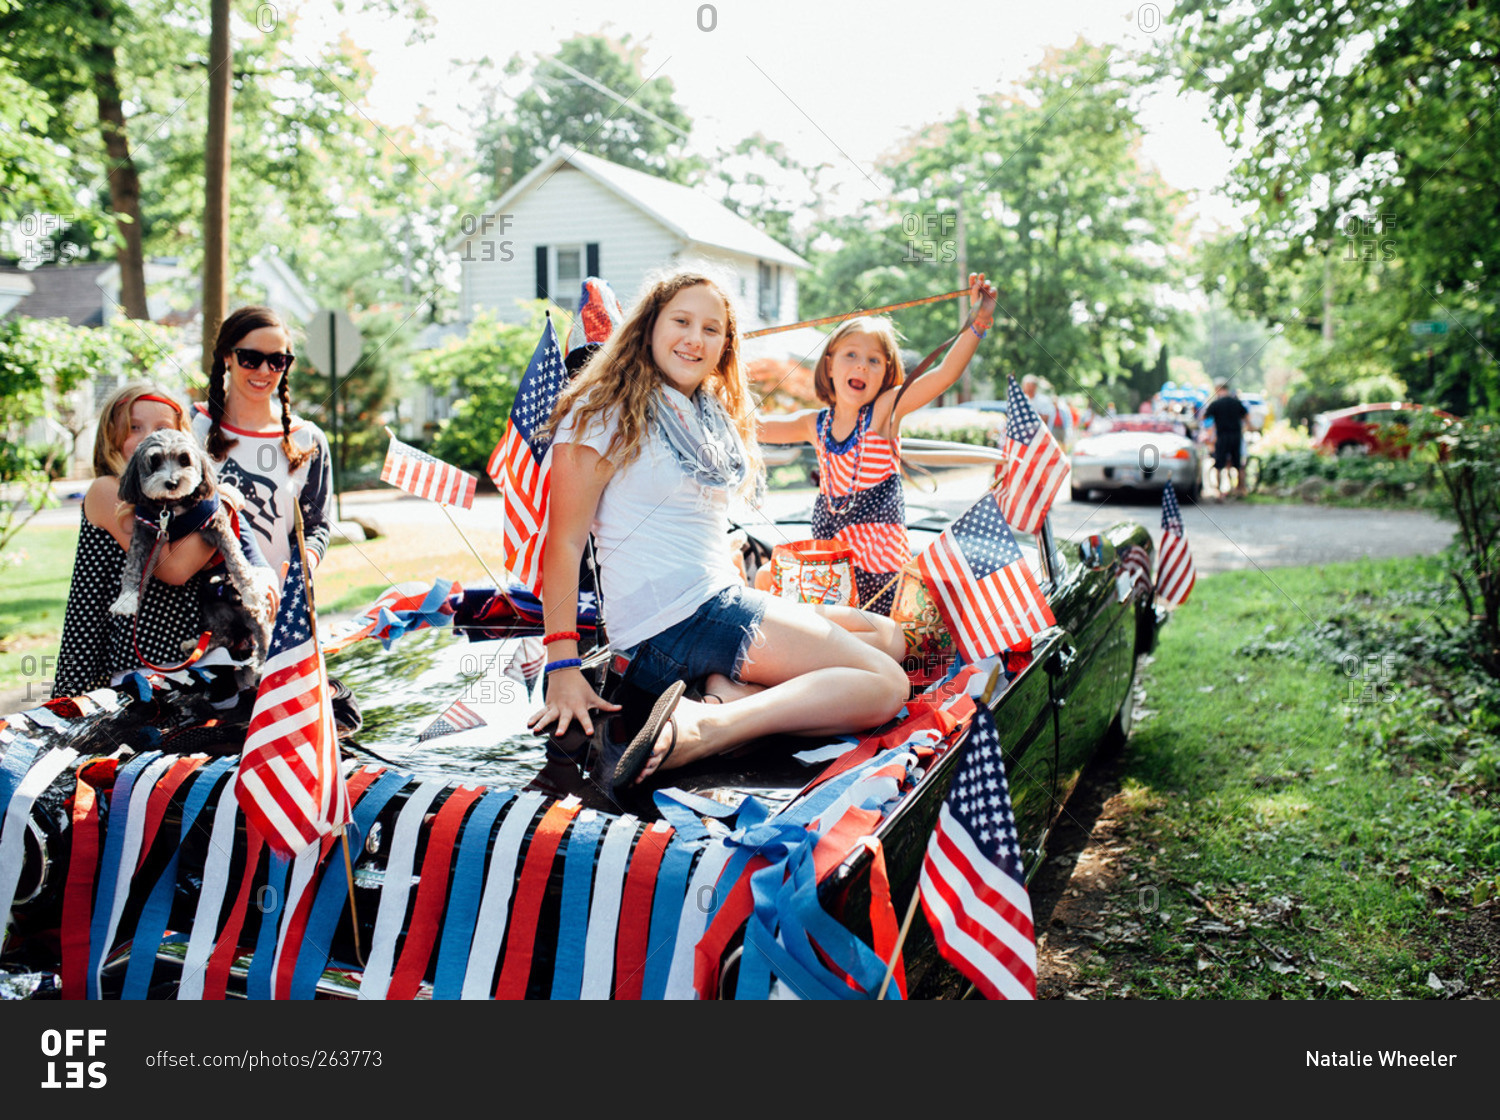 Children playing on the back of a classic car decorated for Independence Day parade